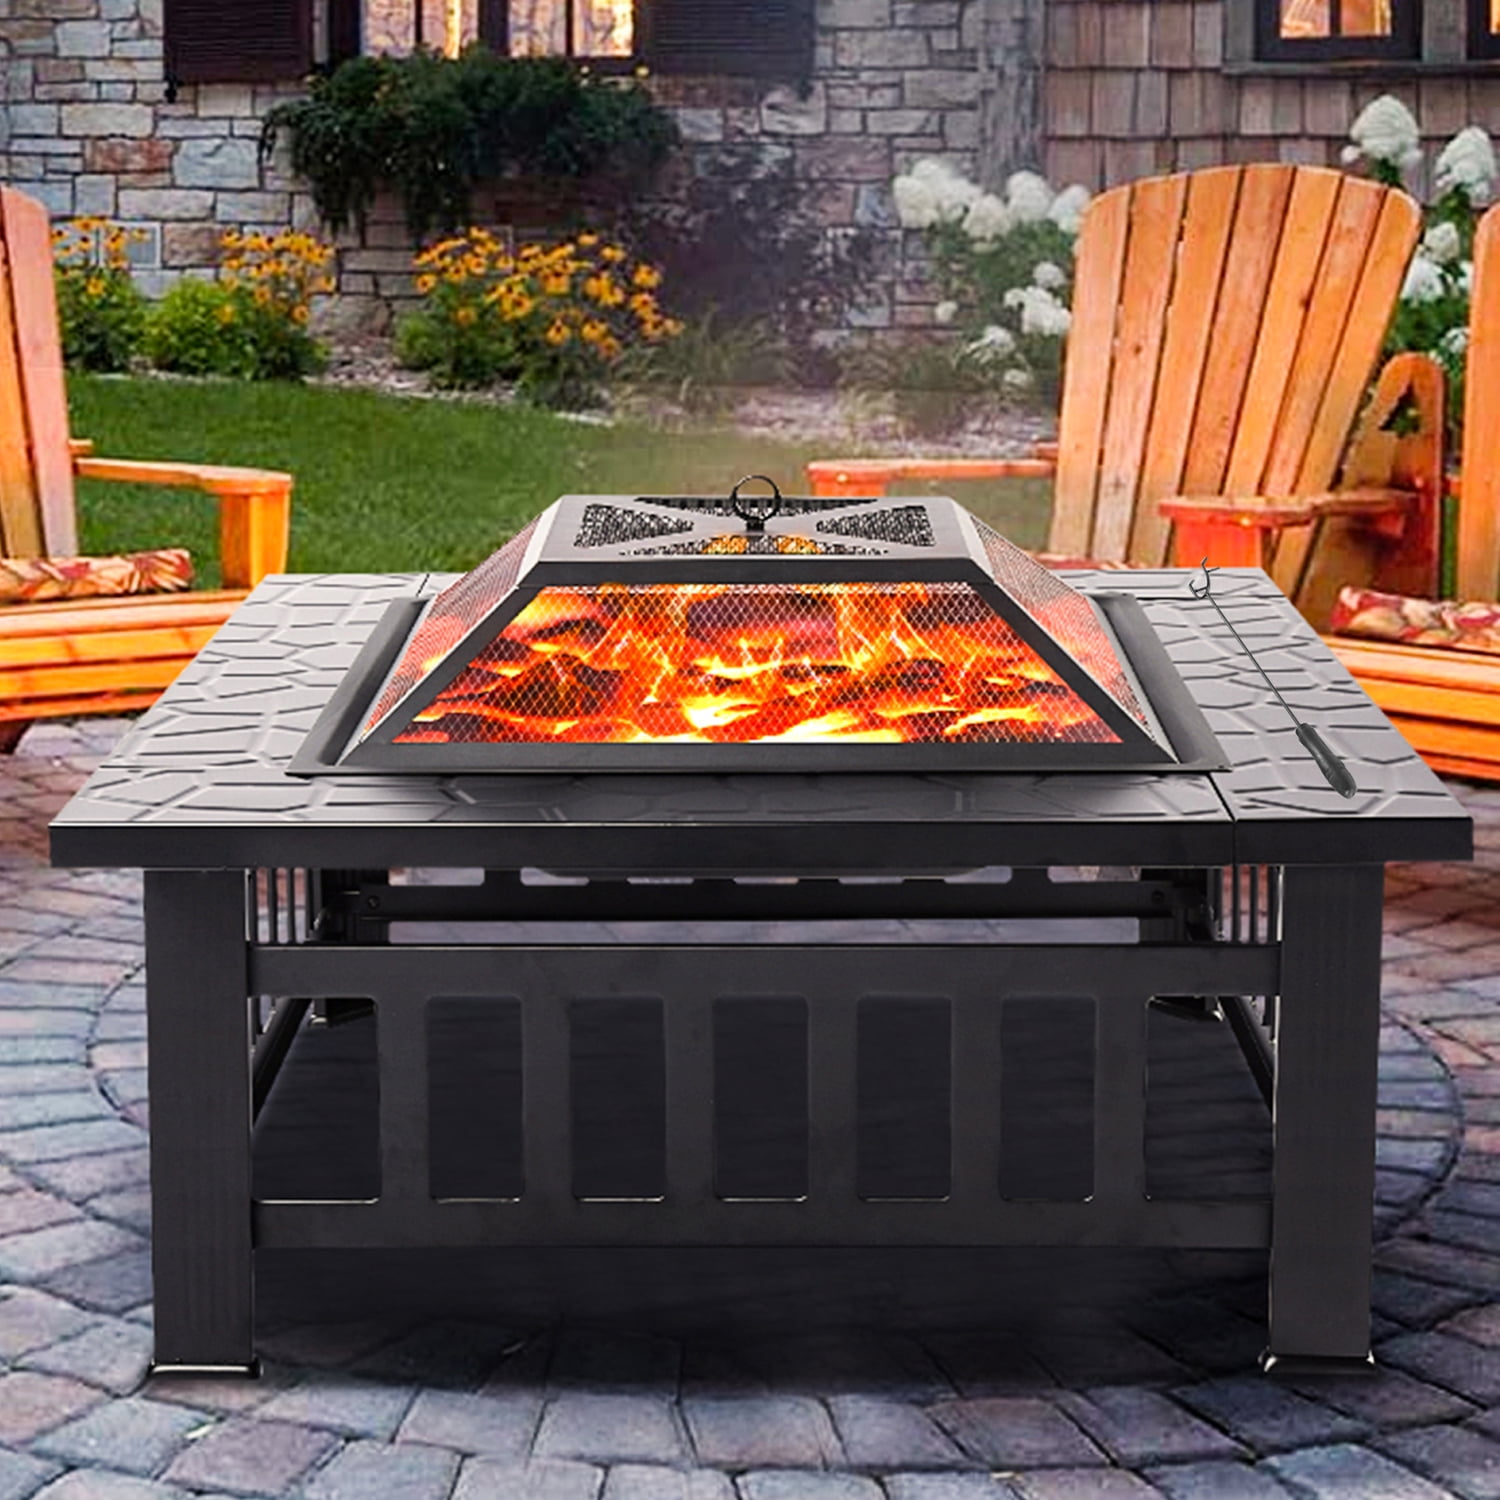 Wood Burning Fire Pit Outdoor Heater Backyard Patio BBQ Stove Fireplace w/ Cover 